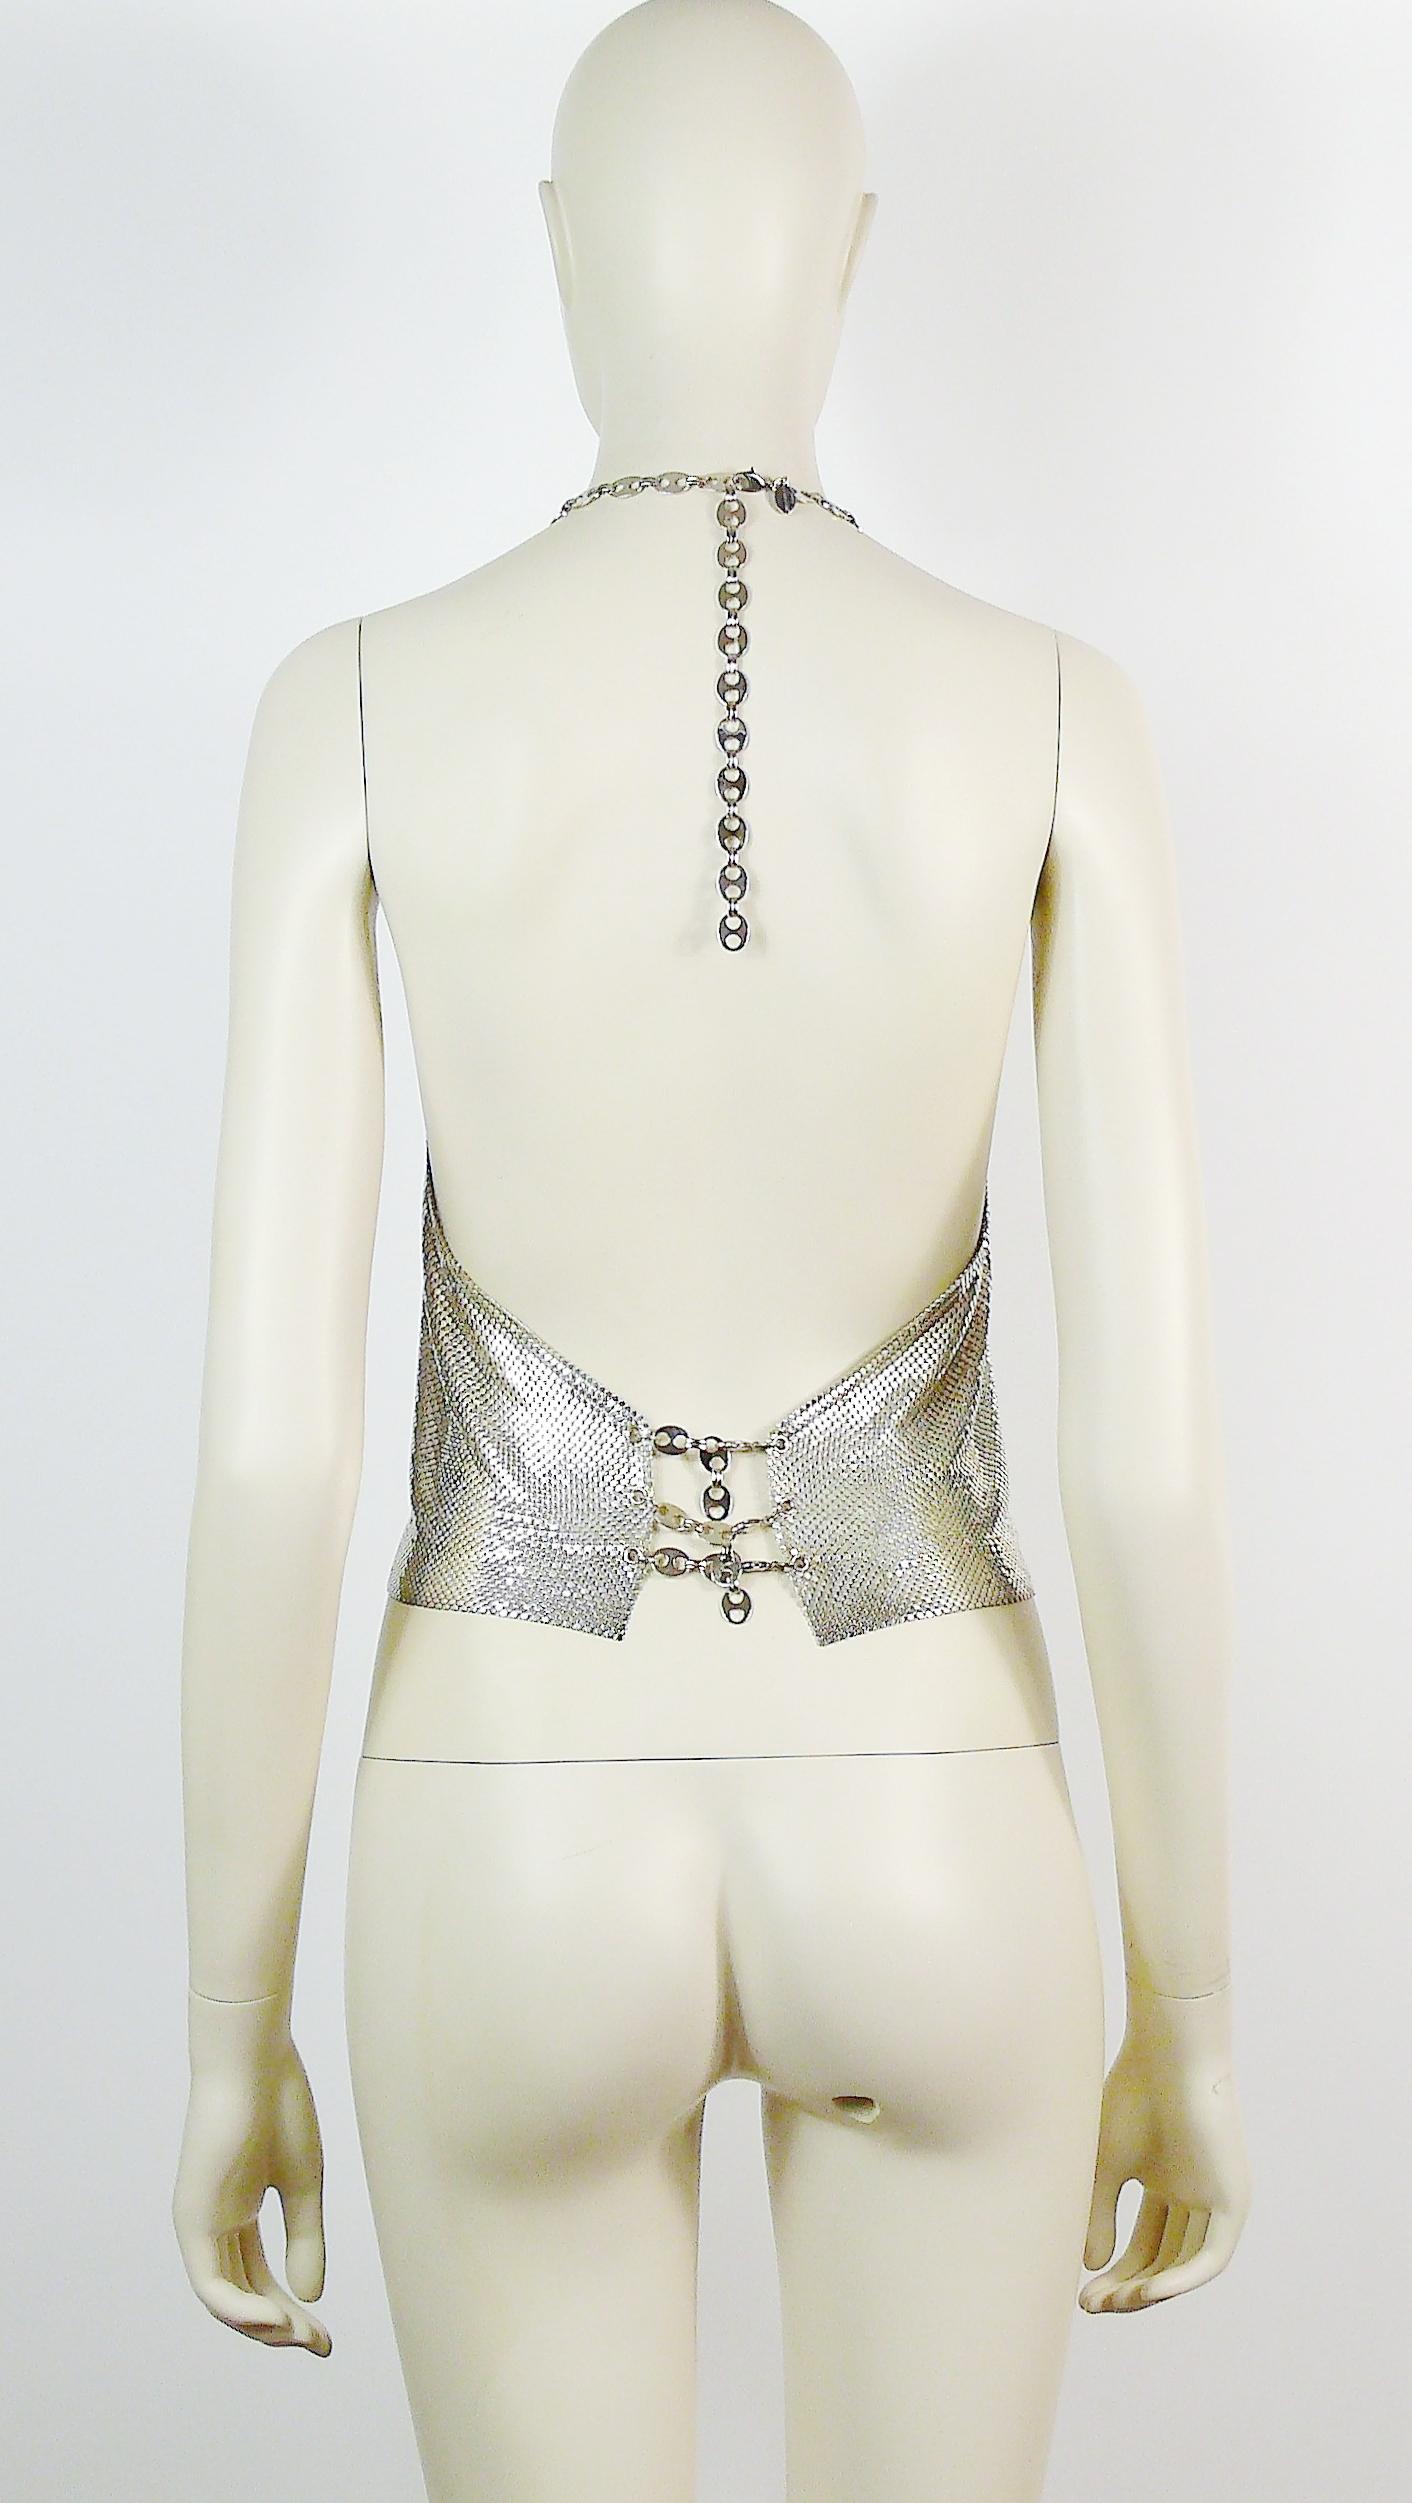 Women's Paco Rabanne Vintage Silver Metal Mesh Iconic Backless Top